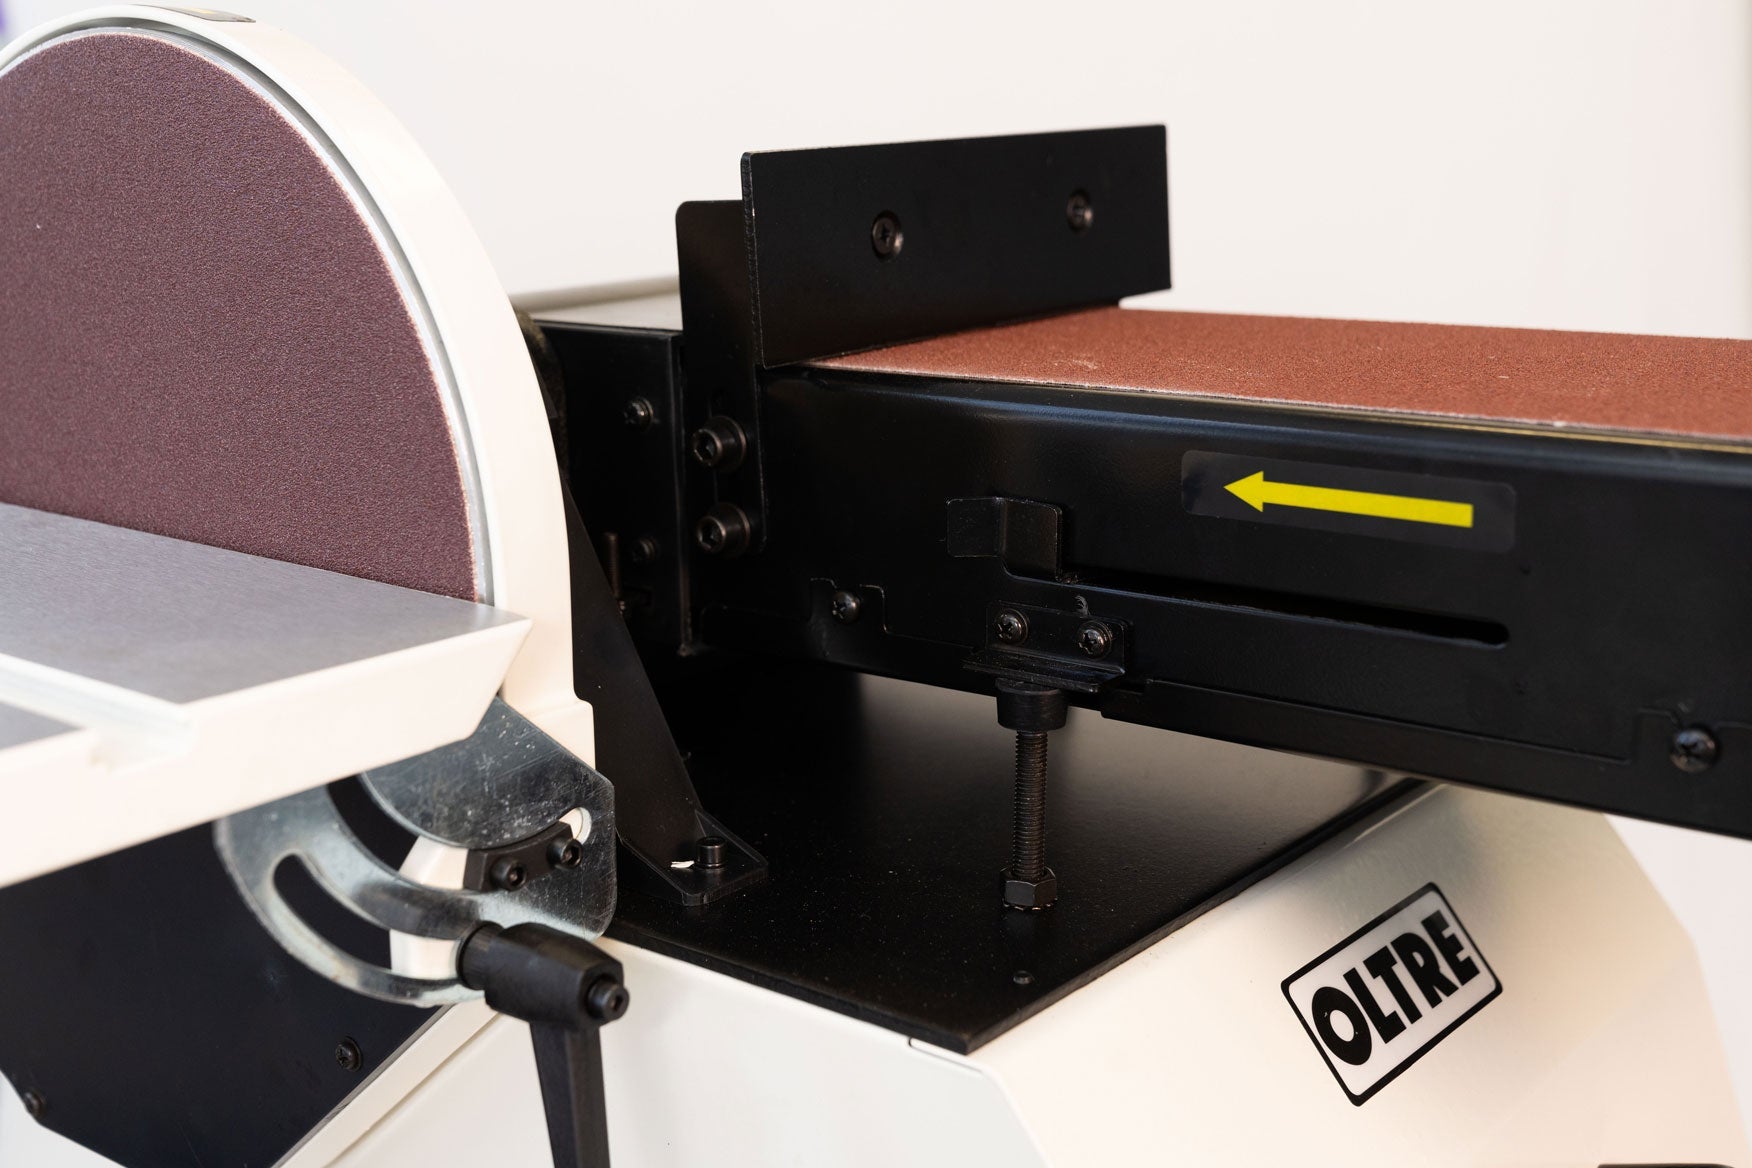 150mm (6") x 1220mm (48") Belt & 250mm (10") Disc Sander With Stand OT-BDS-1200X250 by Oltre